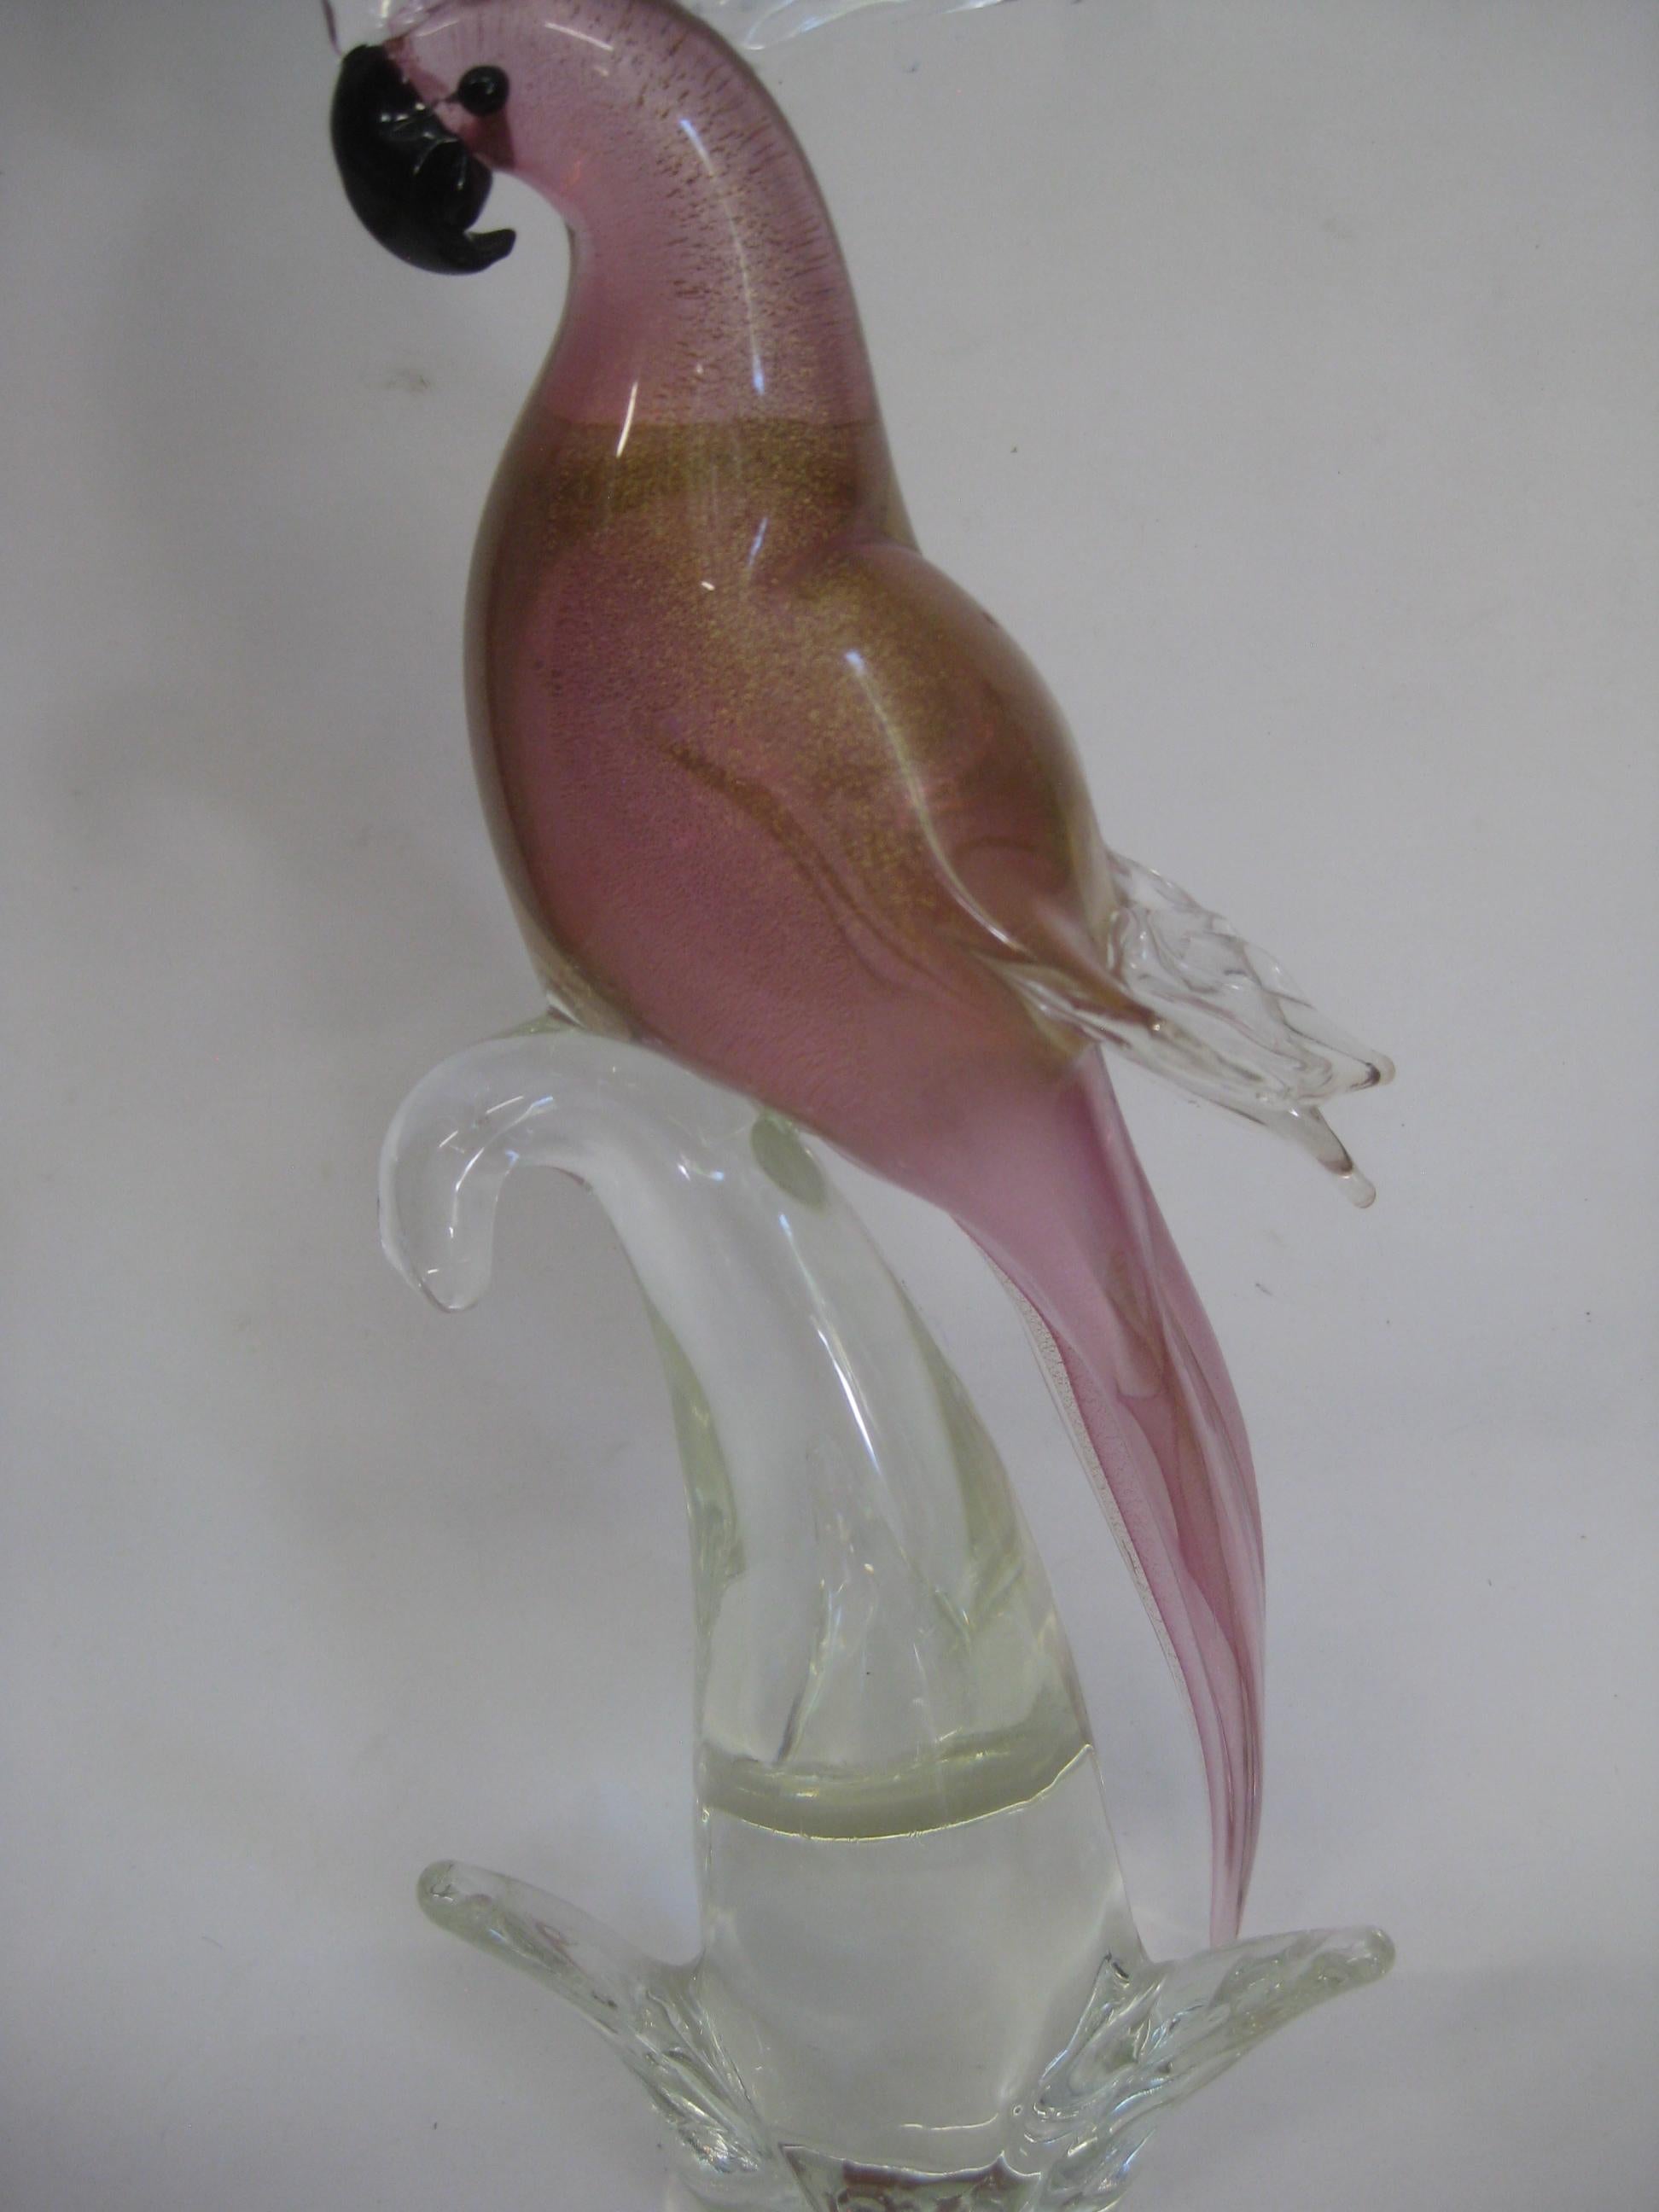 Exquisite Venetian Murano Formia Oggetti Italian Sommeroso Vetri art glass gold fleck hand blown figural cockatoo bird sculpture figure. Great form and color. Has gold fleck throughout. In excellent condition with no issues. No chips, no nicks and